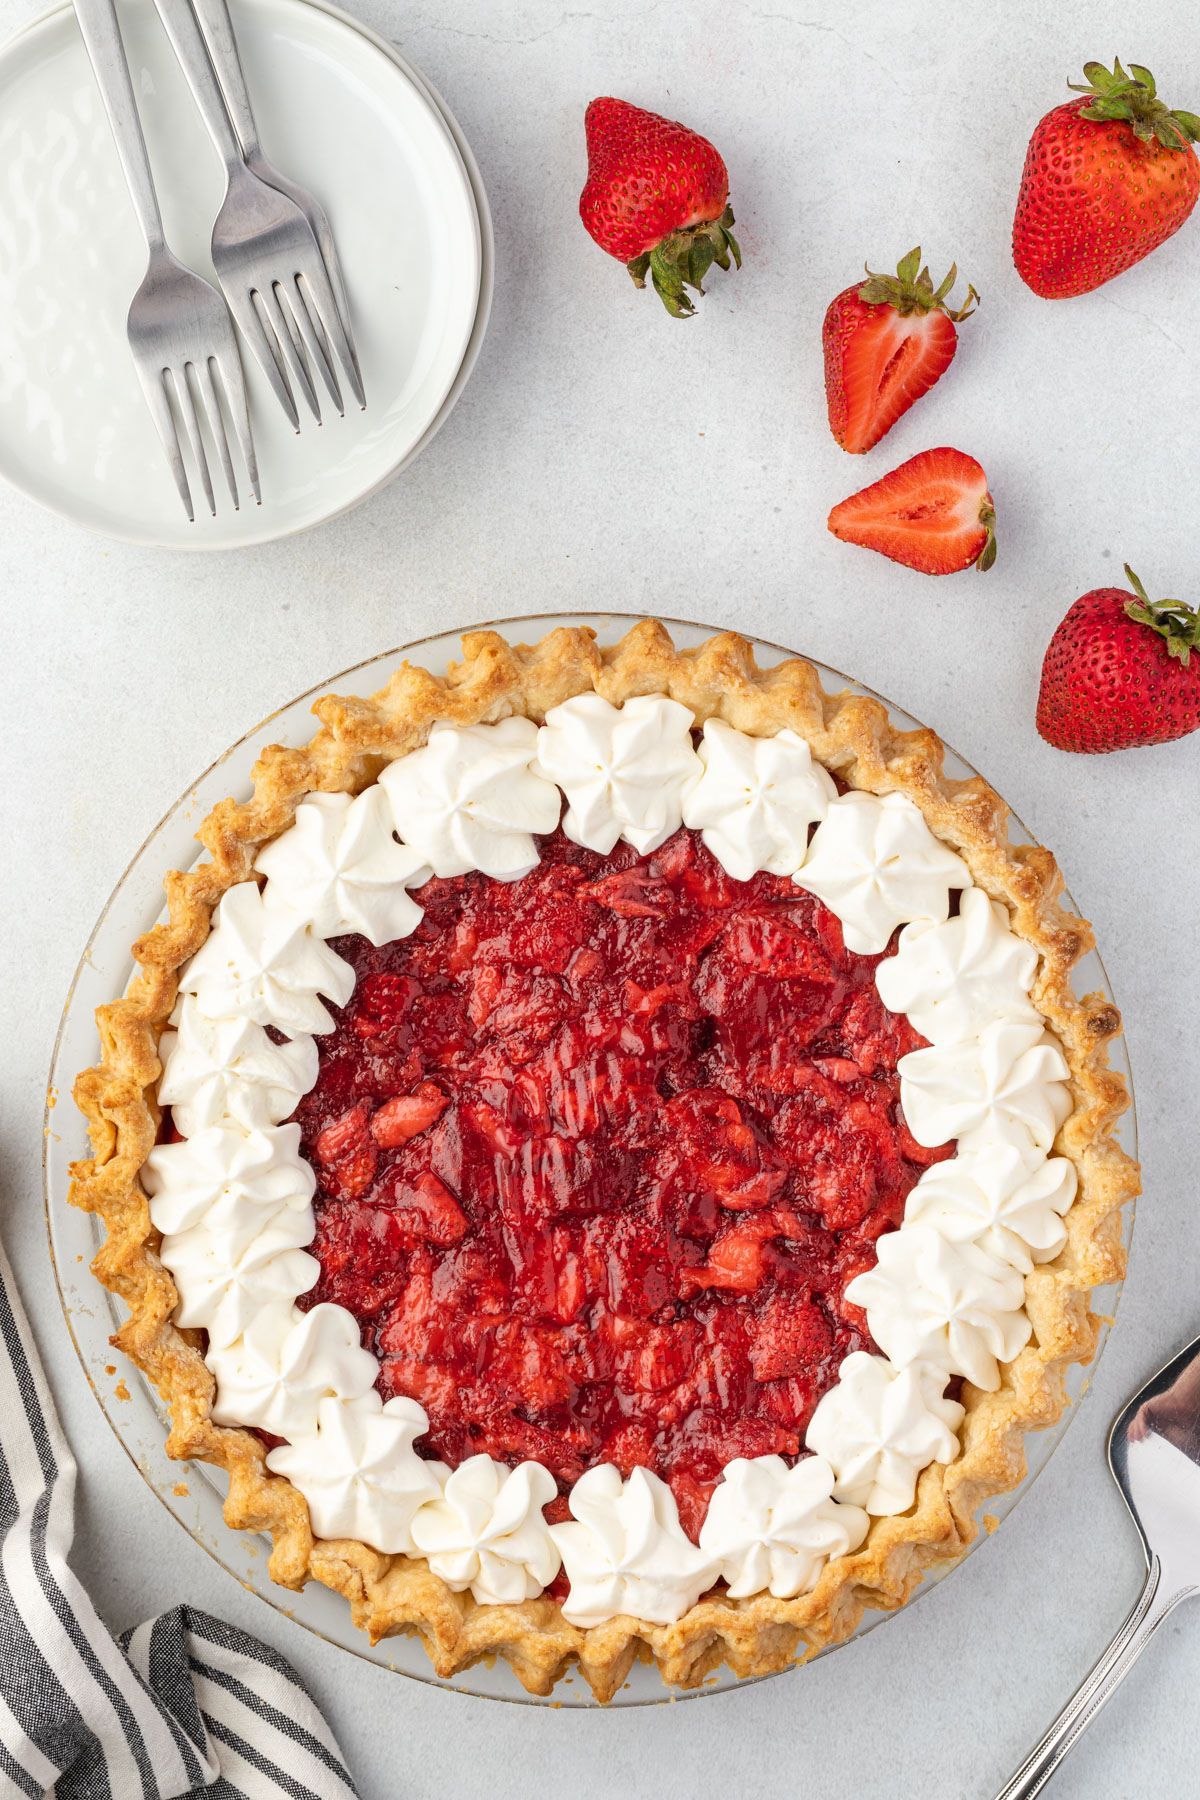 Mouth-watering homemade strawberry pie filling on a cake tray.